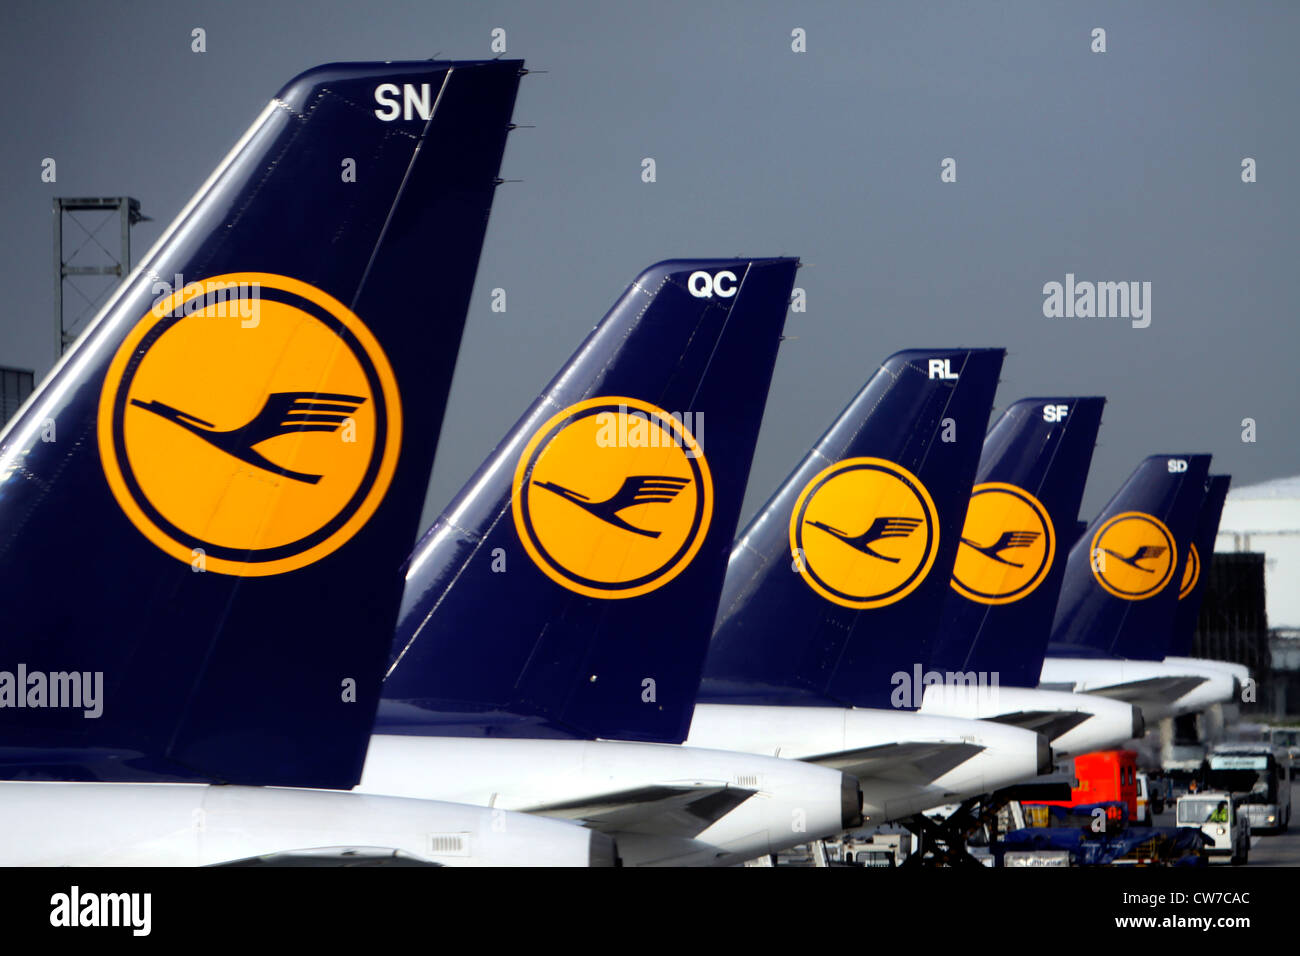 tailpieces of a jet aircraft fleet side by side at an airport terminal, Germany, Hesse, Frankfurt Stock Photo